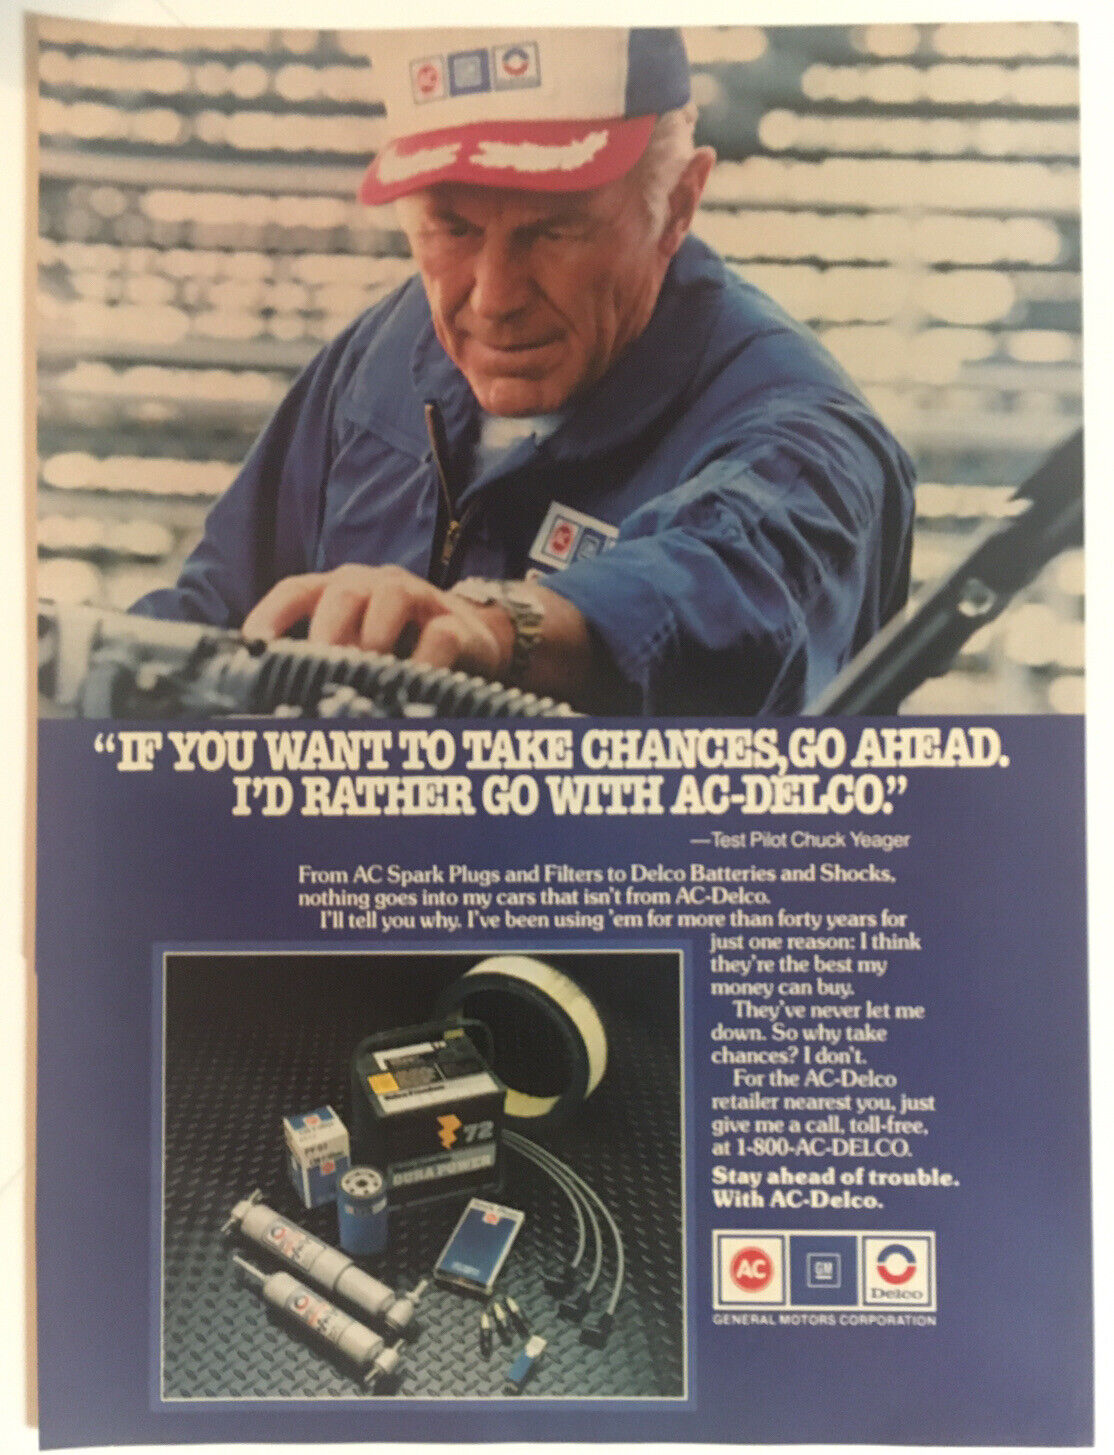 AC-Delco Spark Plugs Chuck Yeager 1987 Vintage Print Ad 8x11 Inches Wall Decor